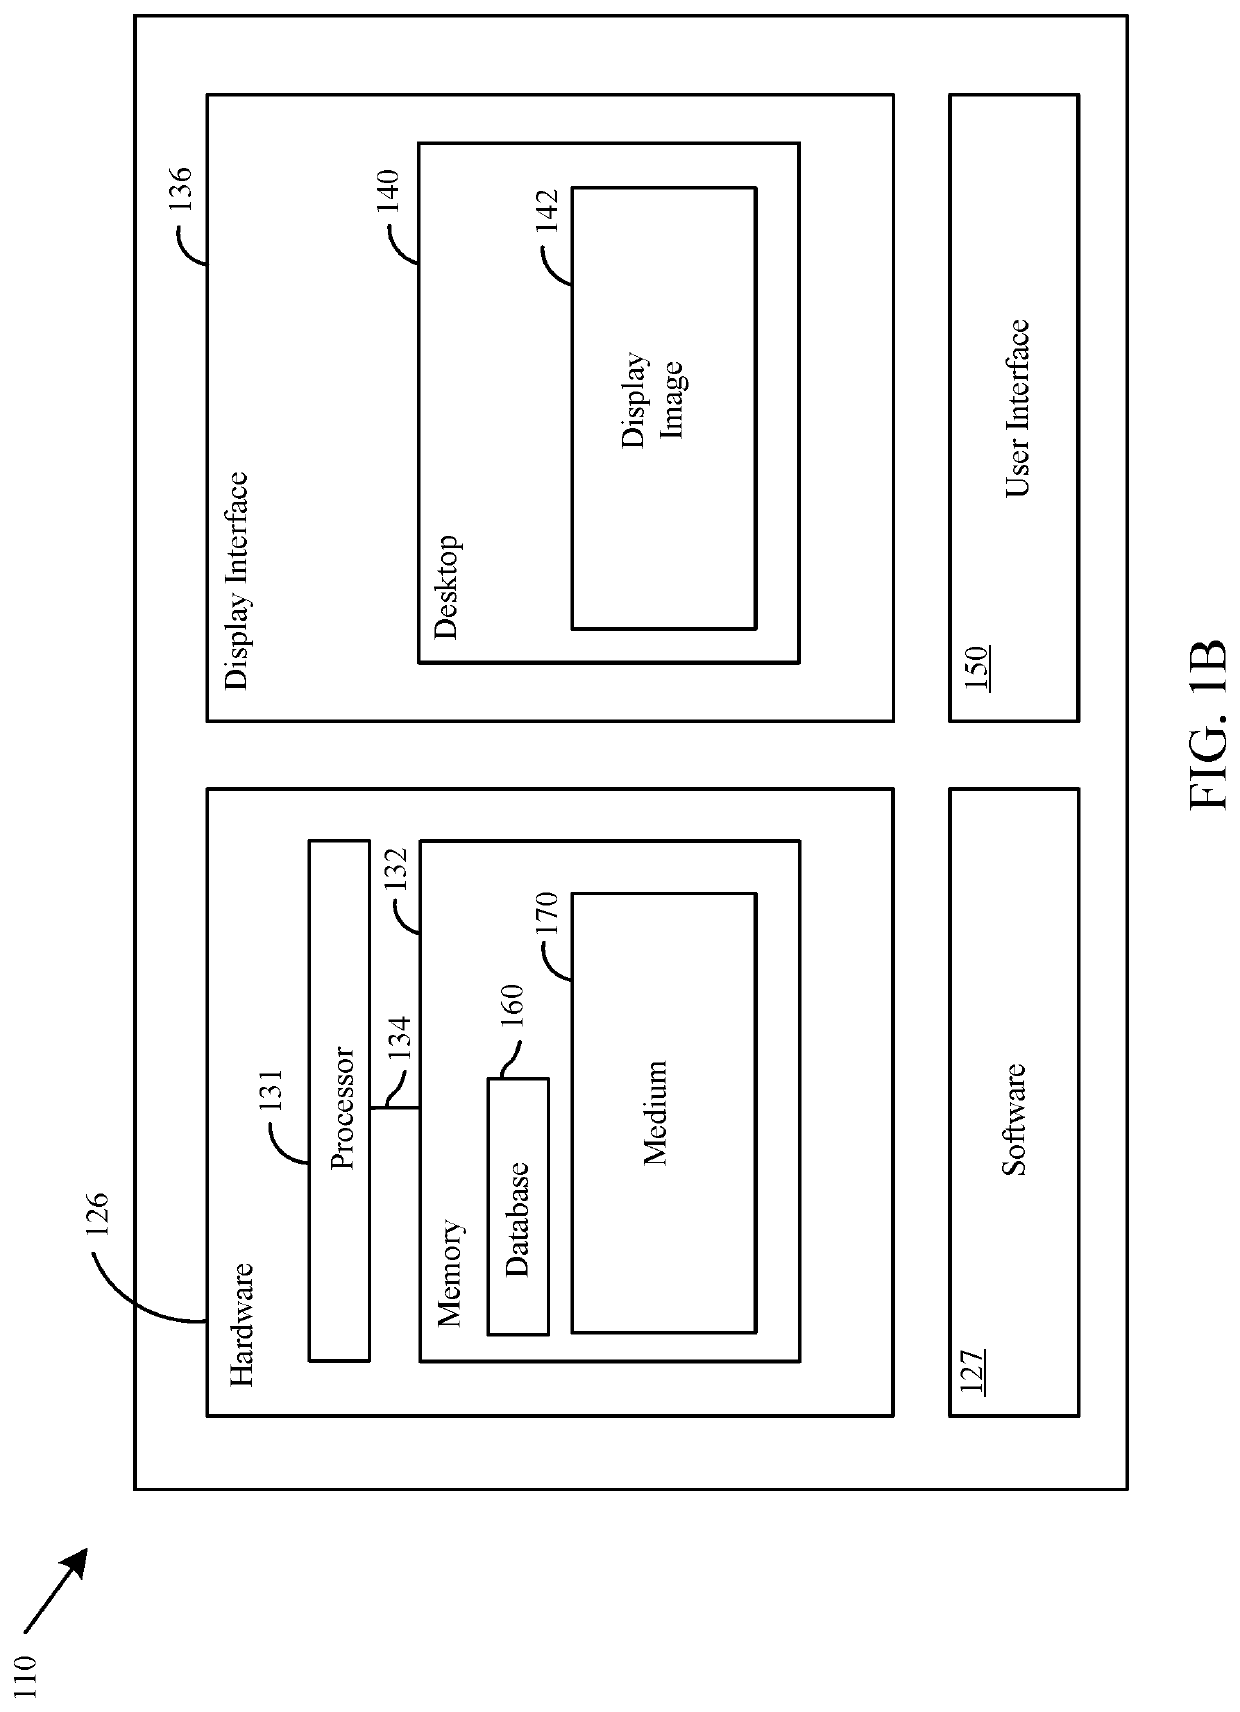 Systems and methods for determining delivery time and route assignments